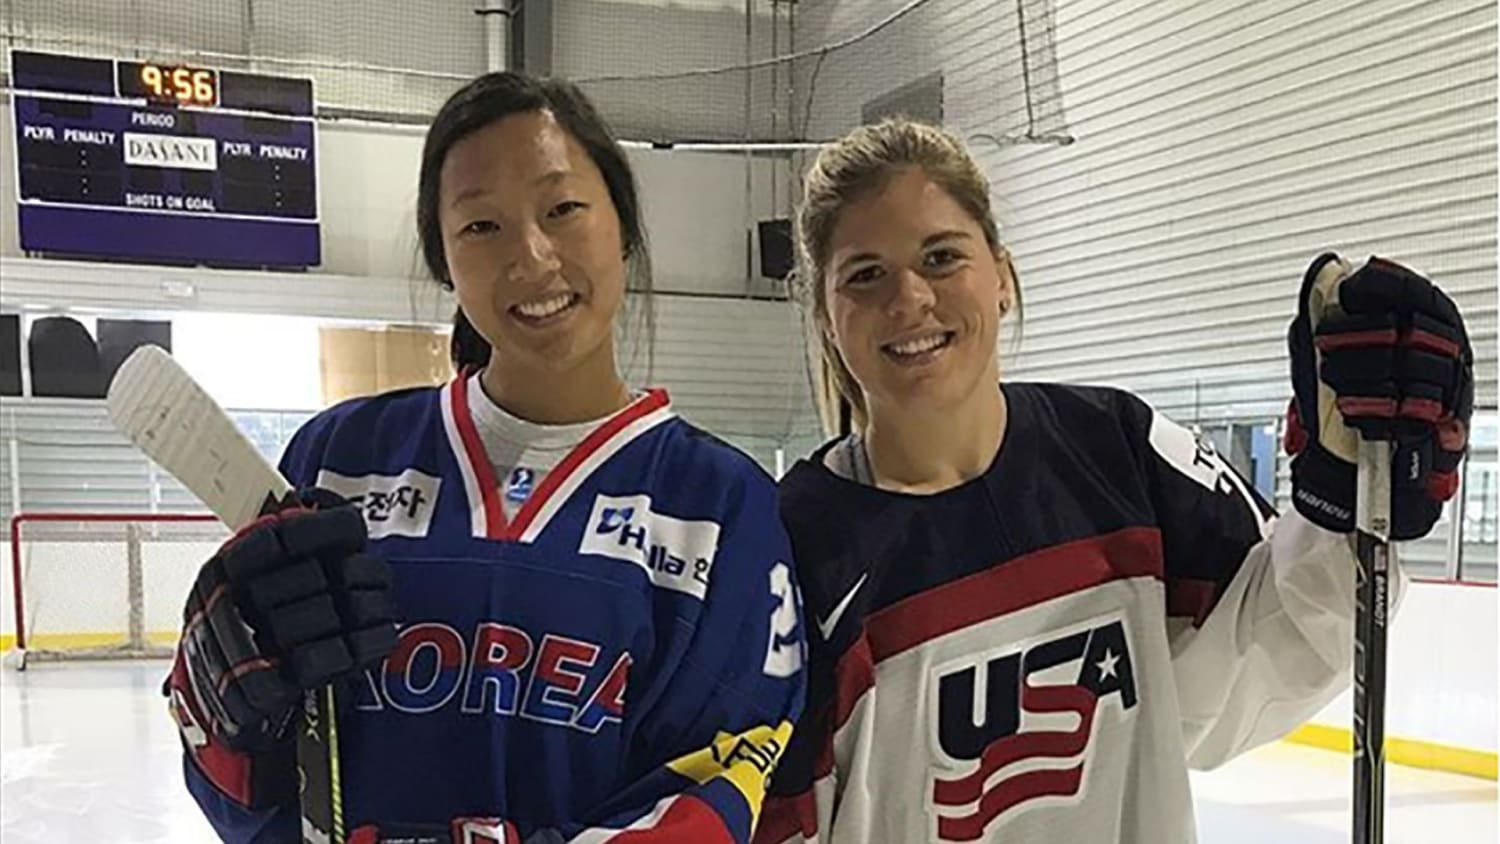 Brandt sisters playing for opposing Olympic ice hockey teams